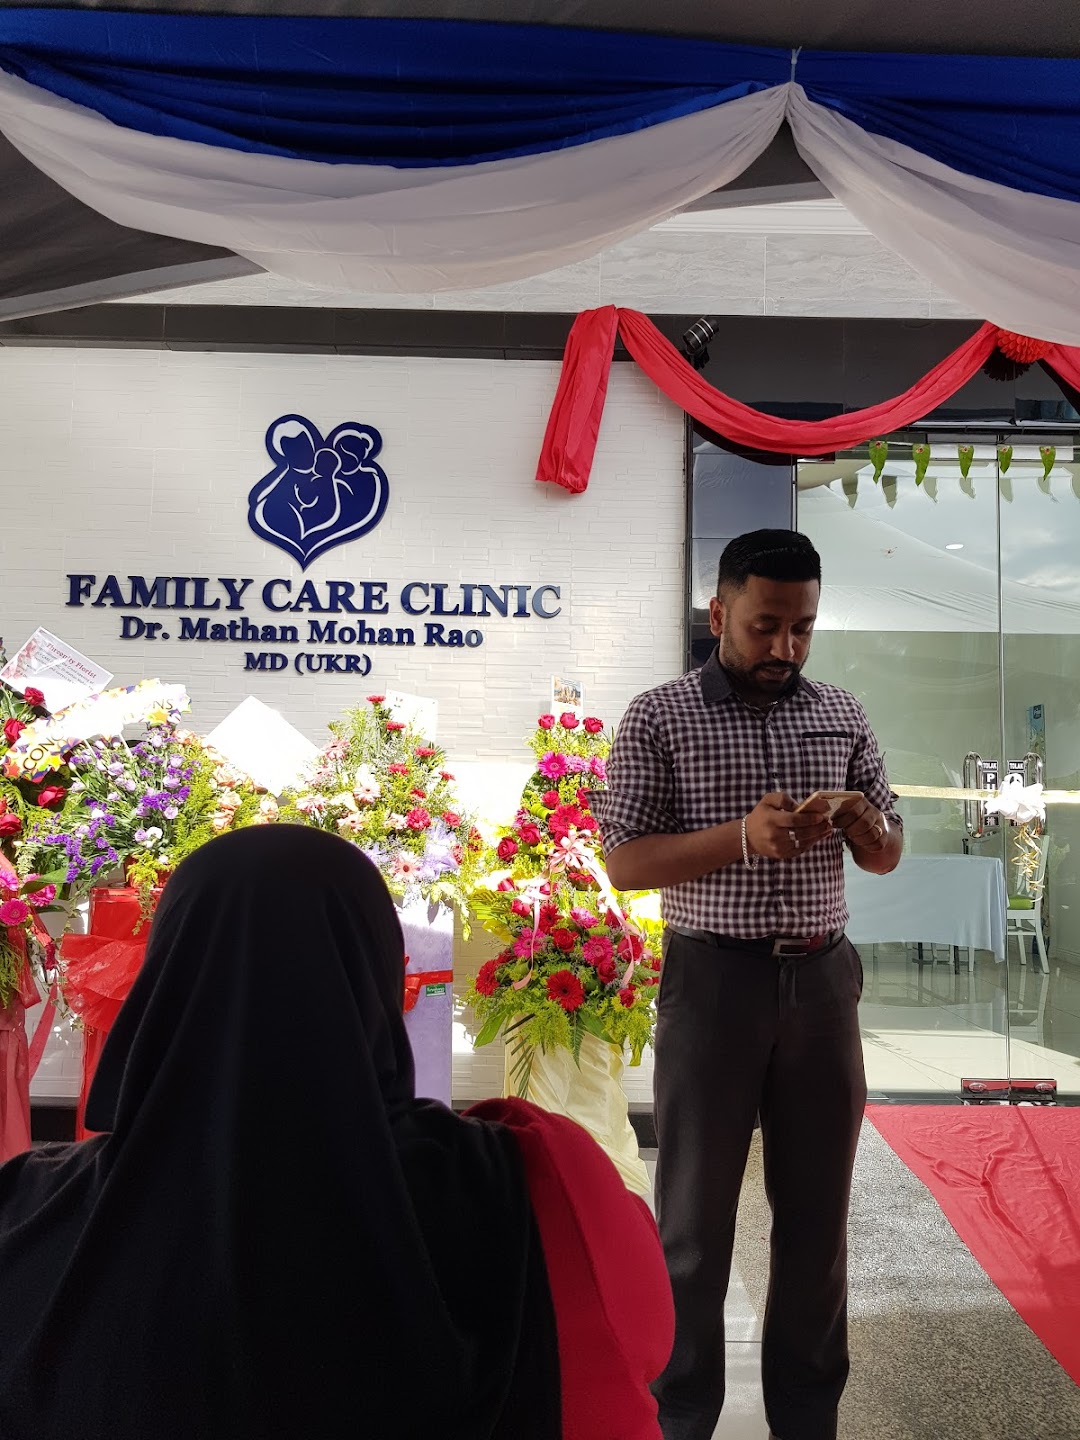 Family Care Clinic, Dr. Mathan Mohan Rao